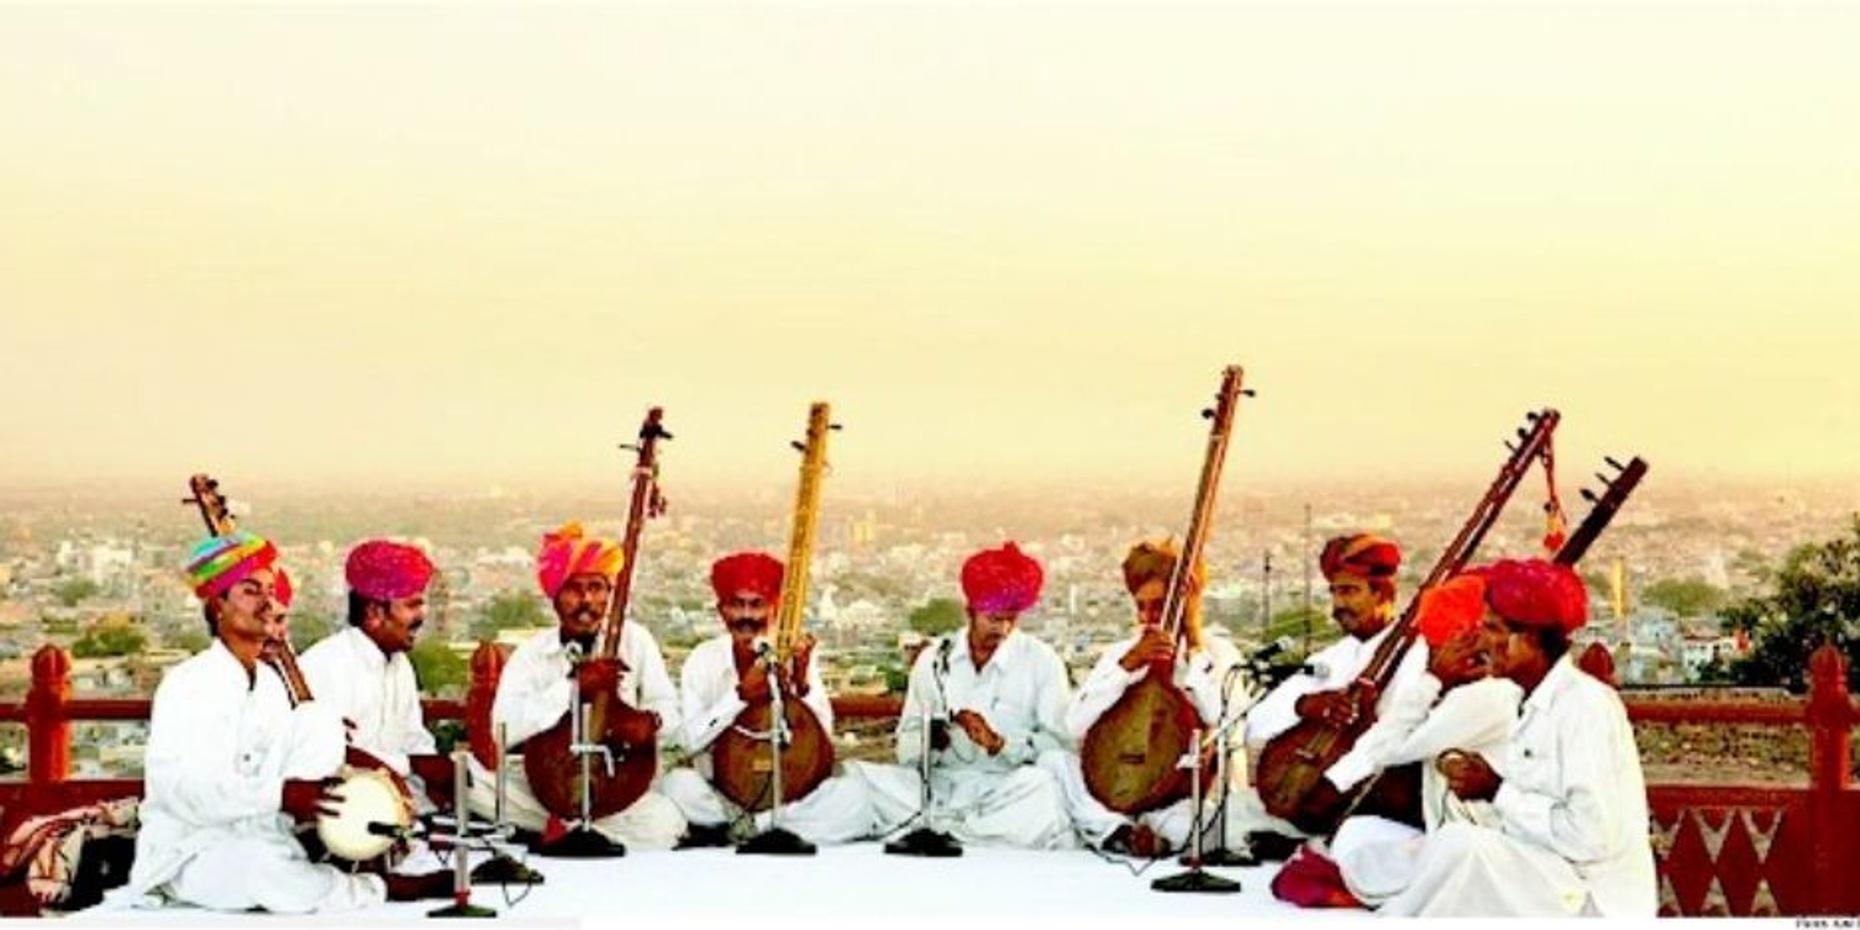 3-Day Vow Renewal Ceremony in Jaipur's Hari Mahal Palace